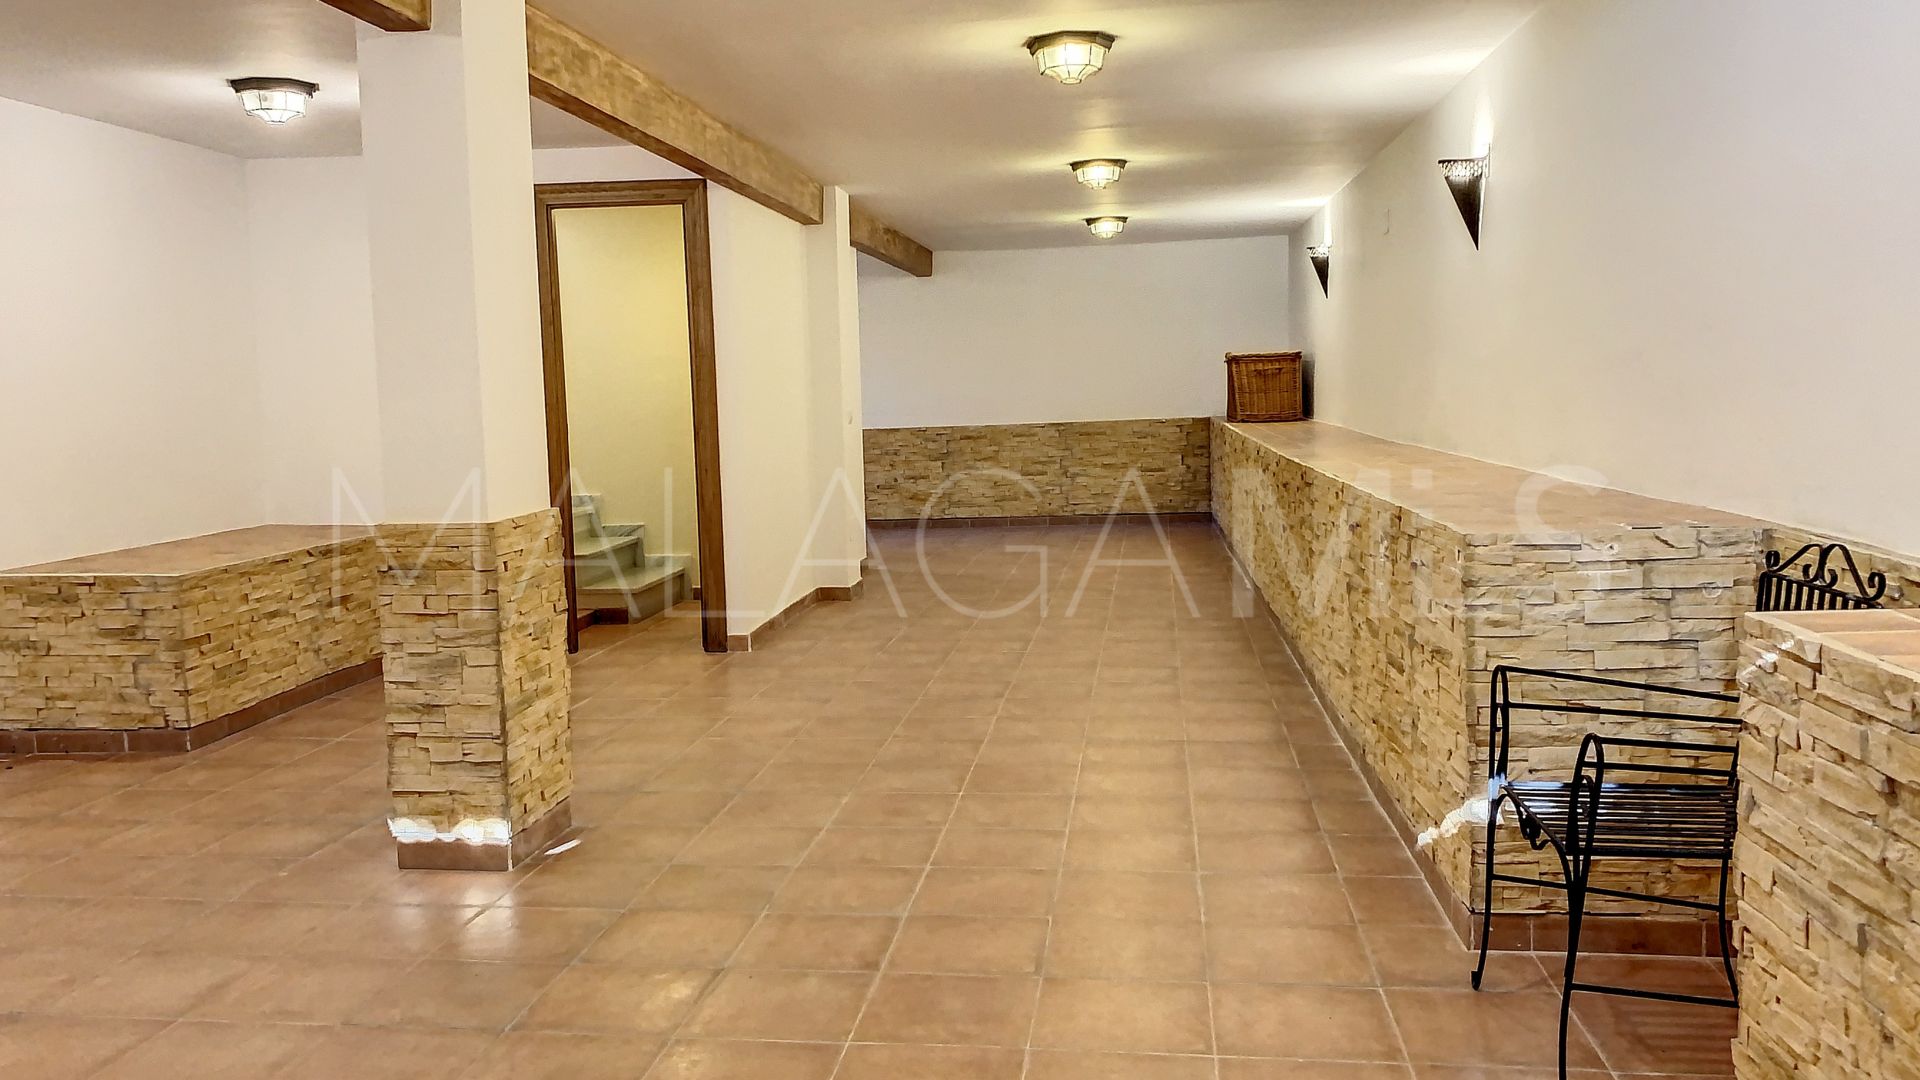 For sale 3 bedrooms town house in Buenas Noches